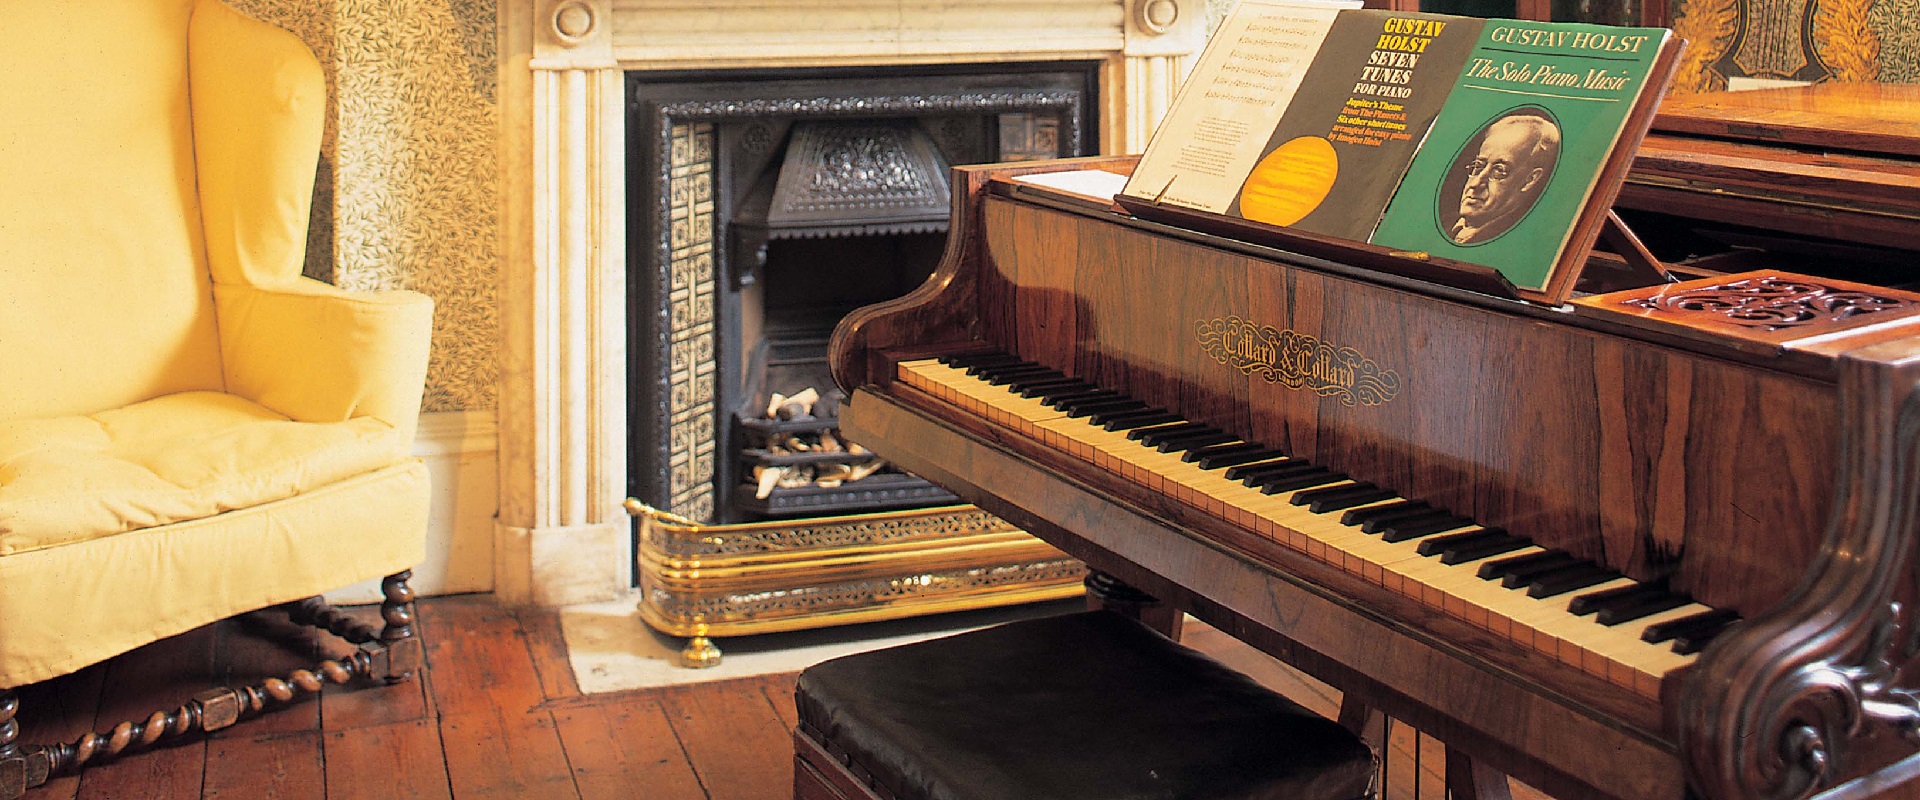 Music room piano in The Holst Victorian House